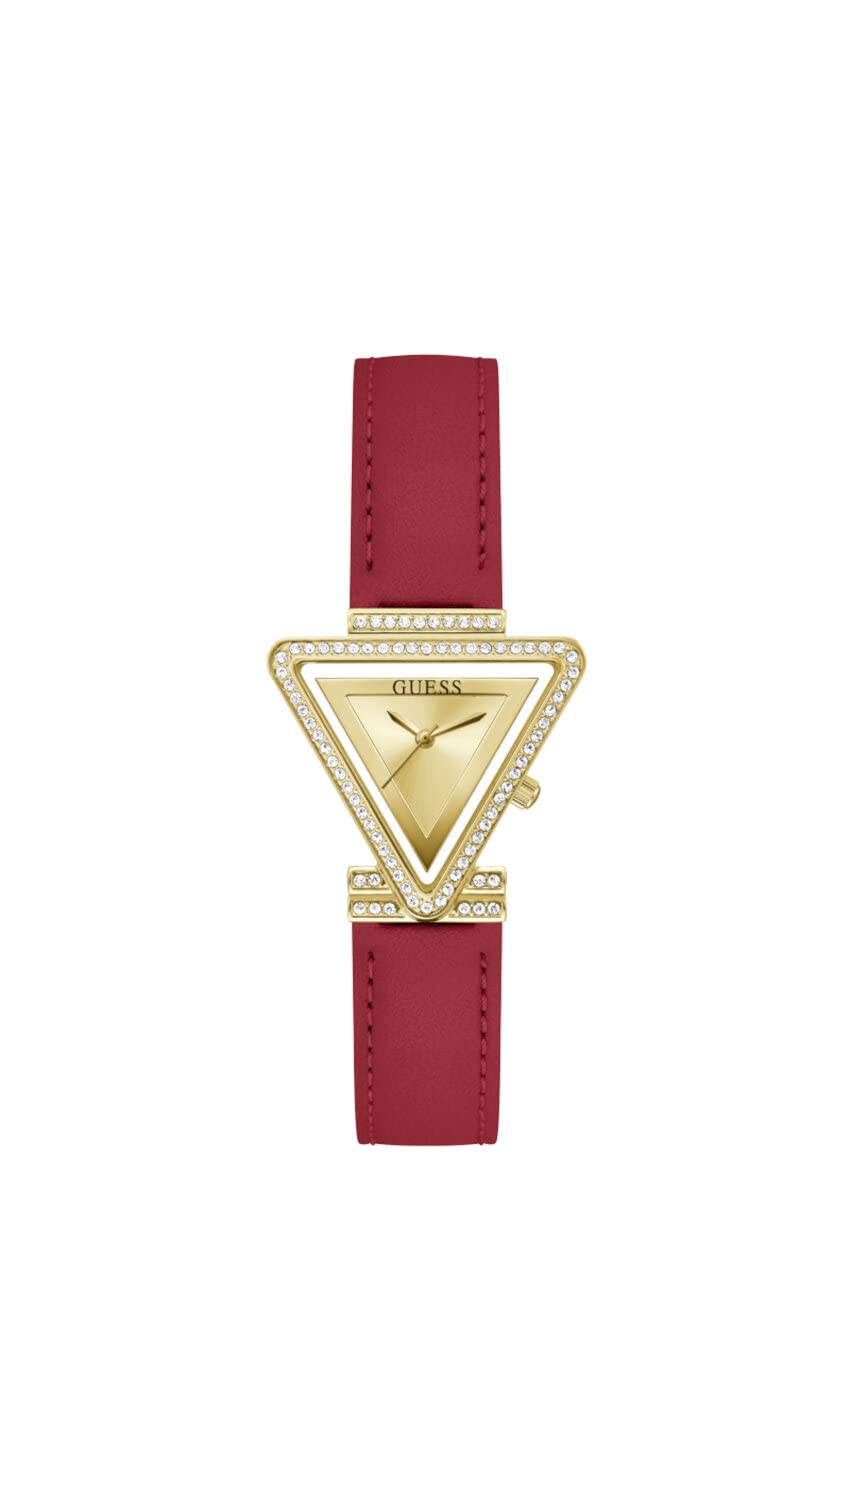 GUESS Ladies 34mm Watch